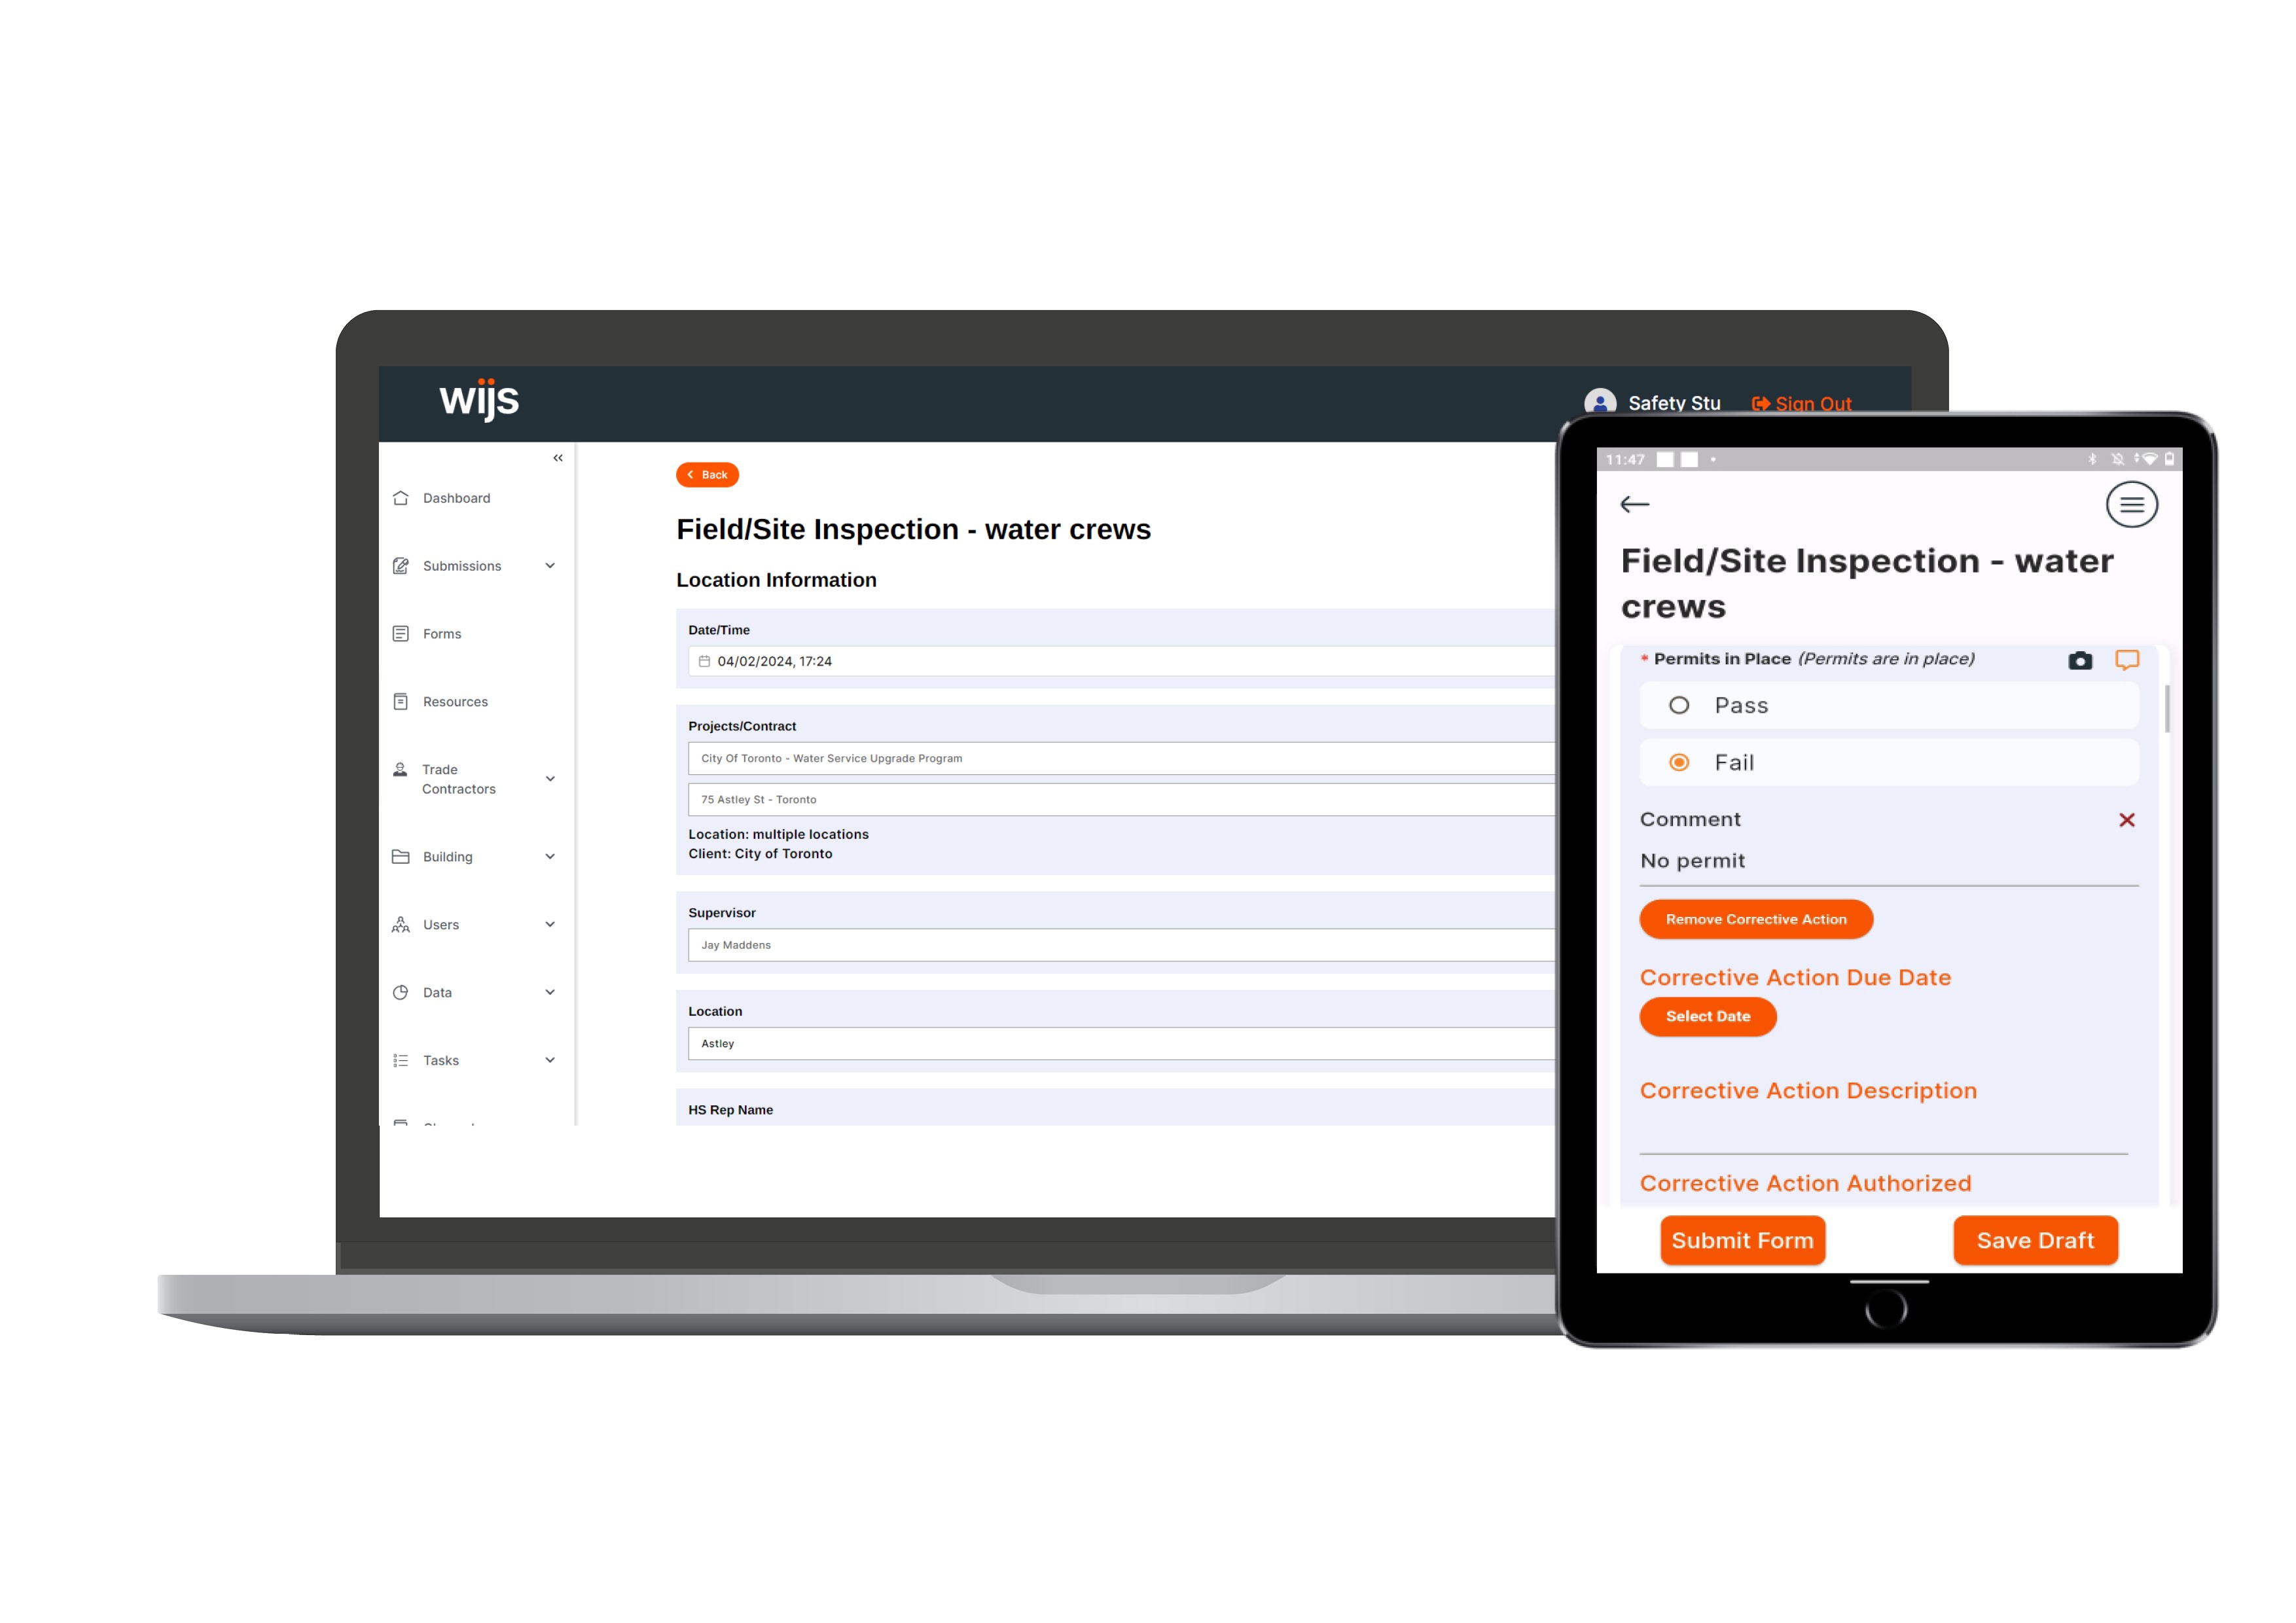 Corrective action required? Create one right in any submission (mobile or webapp) and all info automatically populates into a deficiency registry to easily track and manage all your outstanding and completed corrective actions.